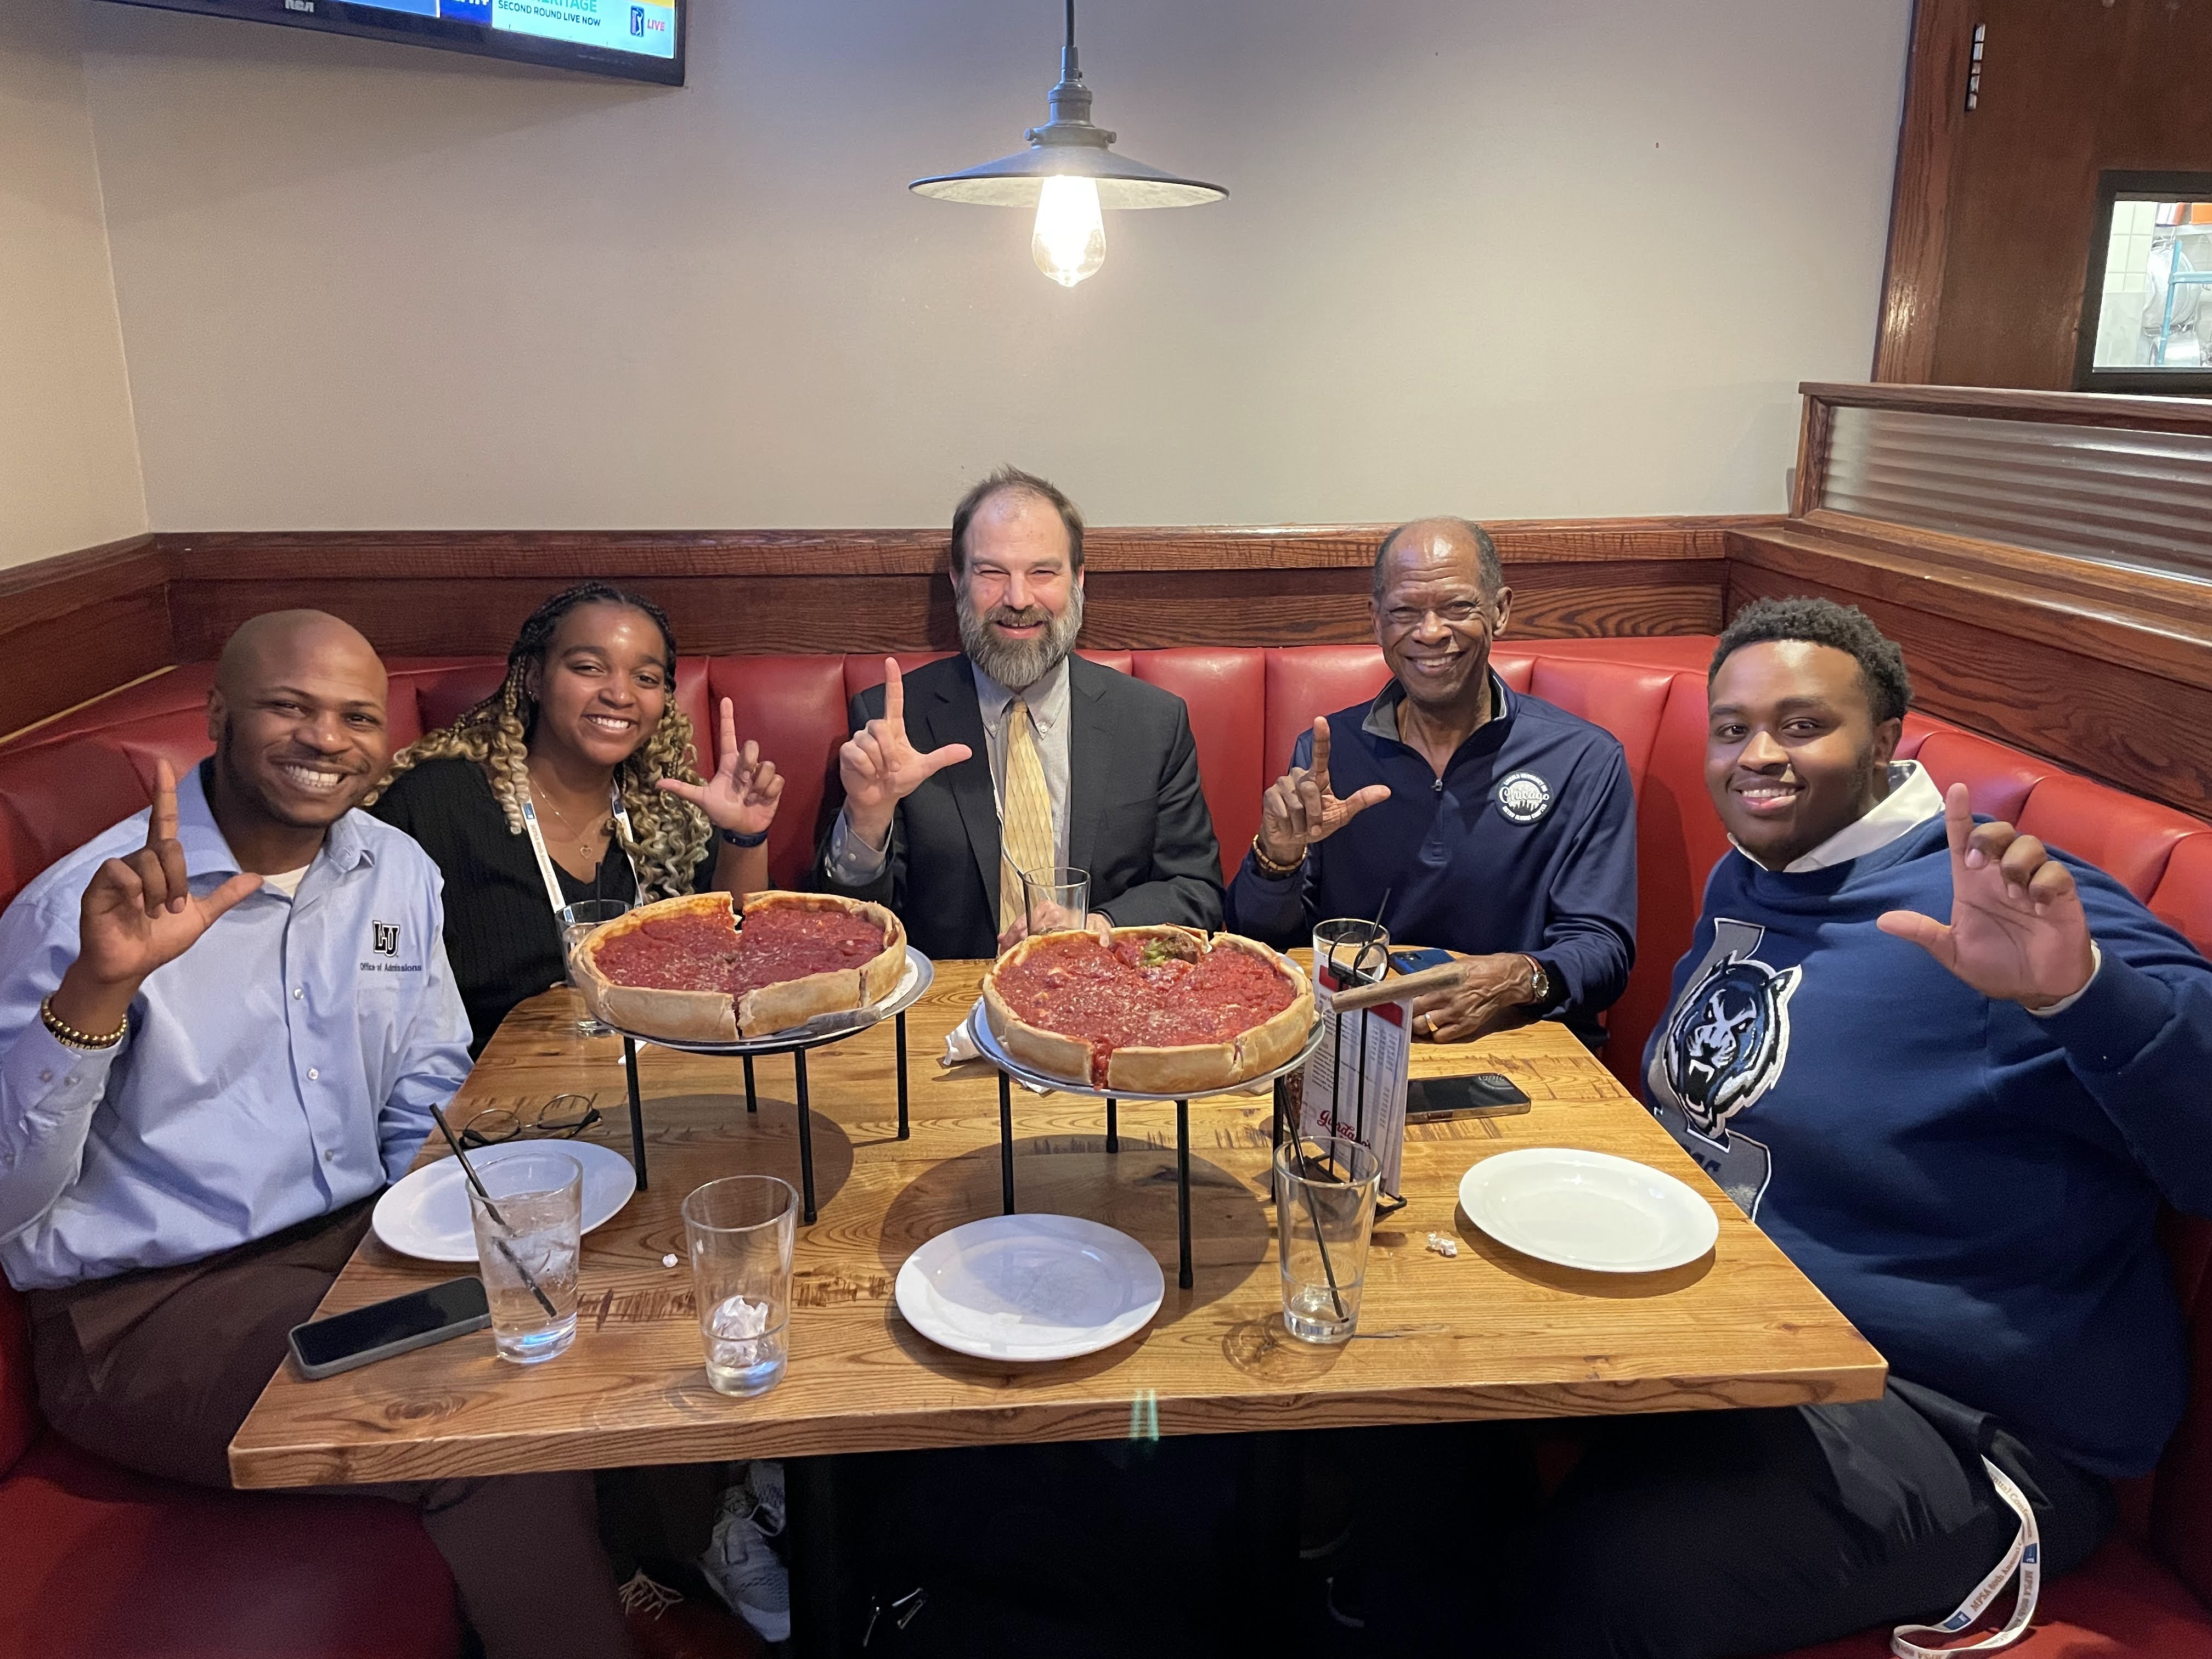 At dinner with LU community (from left to right): LU Chicago alumni chapter leader Lionel Harris, Nia Walker, Associate Professor of Political Science Dr. Brian Norris, LU Chicago-based recruiter Davion Thomas and Alexandre Mugisha.